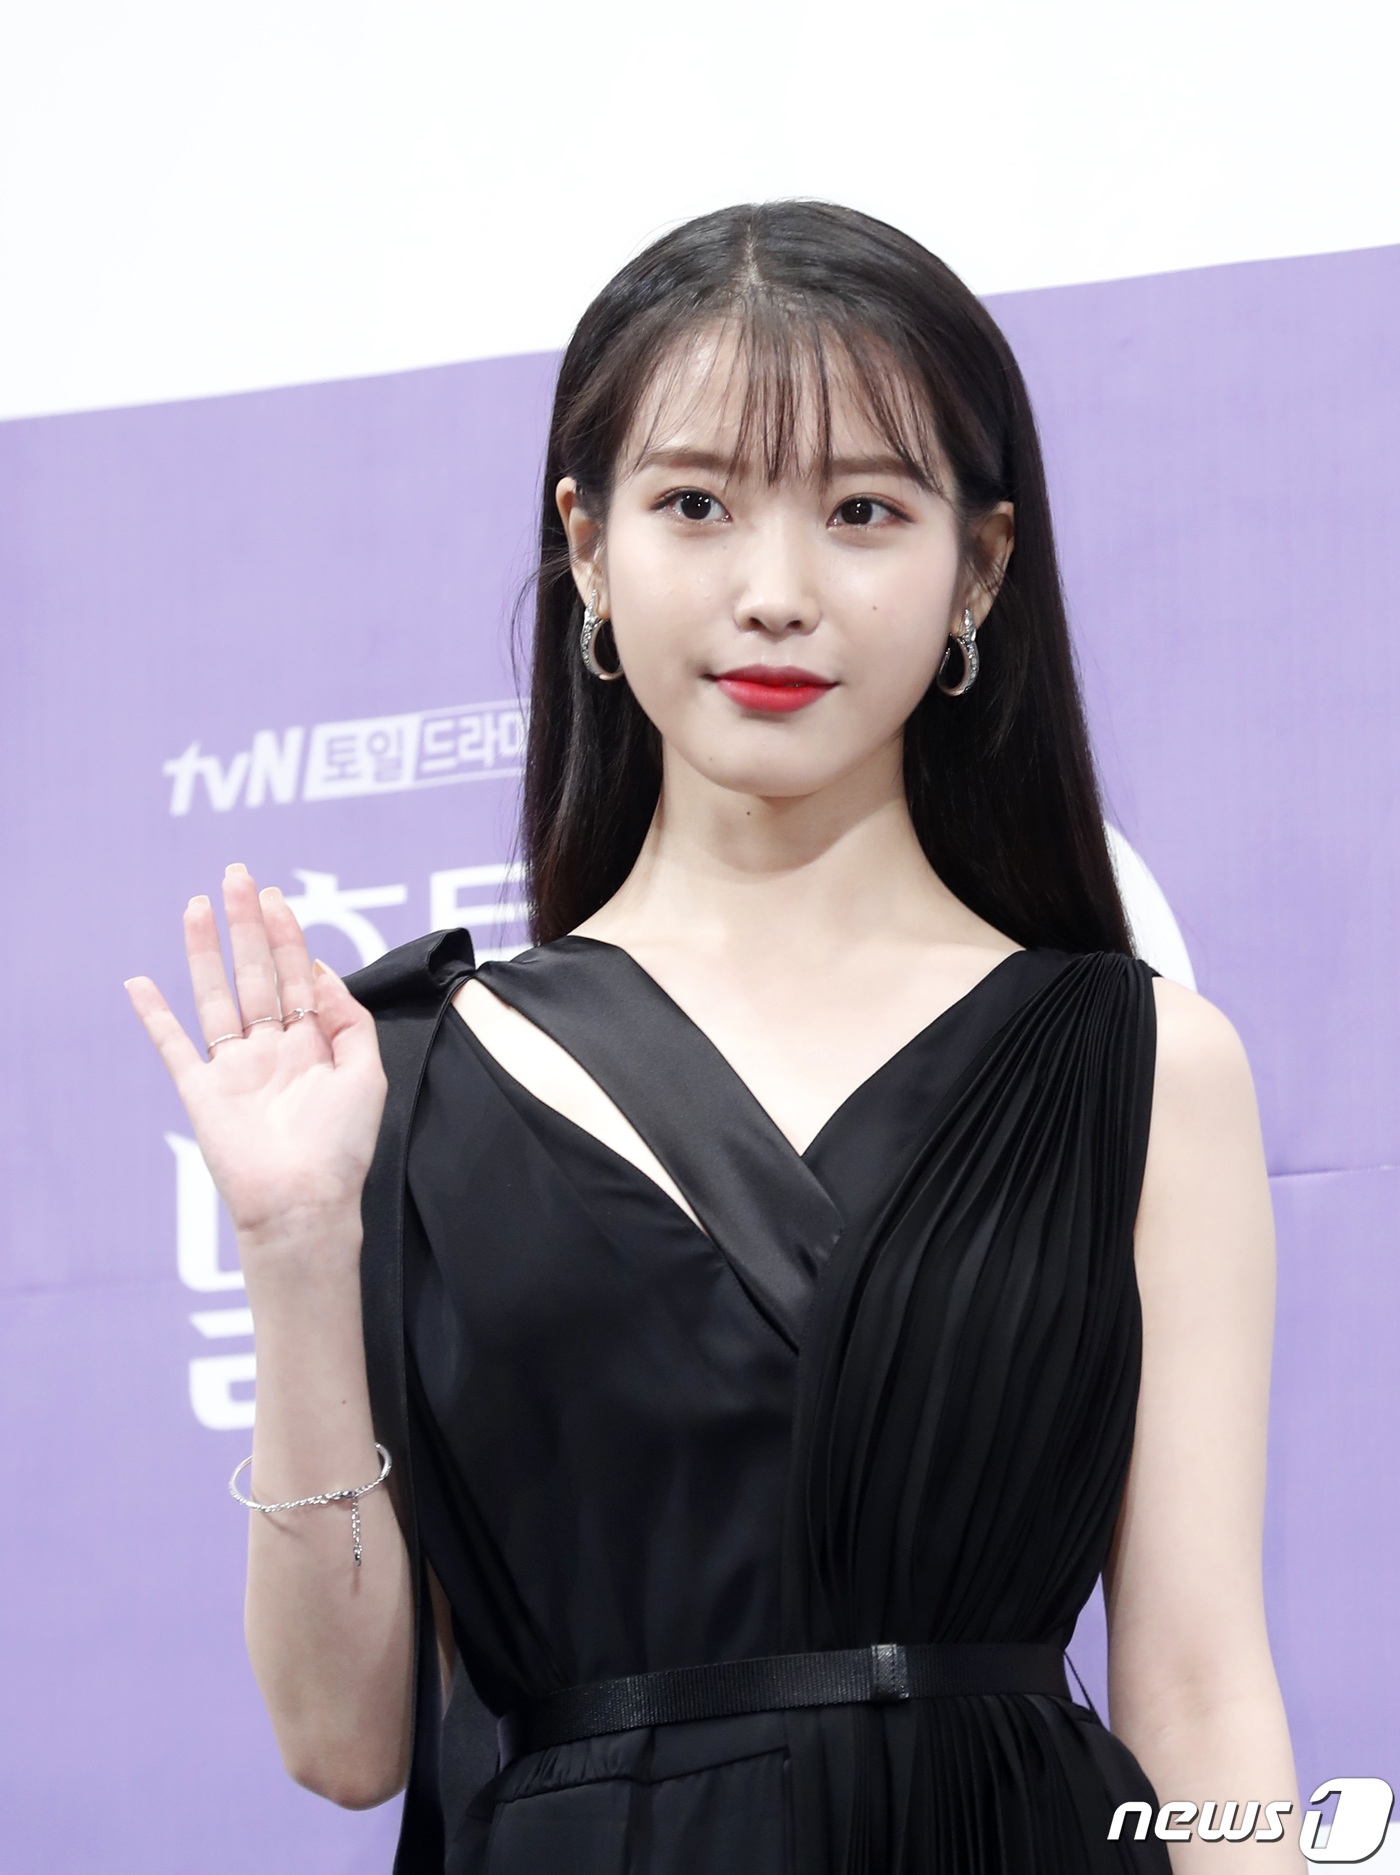 Seoul = = Actor Lee Ji-eun (IU) has confirmed the casting of Lee Byung-huns next film, Dream (Gase), which directed Extreme Vocational.Dream announced on March 3, Lee Ji-eun, who has emerged as a attracting actor of Chungmuro, has confirmed the casting of Dream.Dream is a special (?) that caught the first ball in his life with the footballer Hongdae (Park Seo-joon) who is in the biggest crisis of his career.) It is a pleasant drama of Greene for the challenge of a national team players homeless World Cup.In Lee Byung-huns next film, Dream, directed by Lee Byung-hun, Lee Ji-eun plays the role of PD Lee So-min, a broadcasting station that dreams of success by producing a documentary of the improvised soccer team directed by Hongdae.In this film, Lee Ji-eun will show a frank and bold appearance that does not hide his desire for life reversal, and a heartwarming appearance that supports the dream of the athletes more than anyone else.Lee Ji-eun has been performing in dramas such as Producers, My Uncle and Hotel Deluna since he started his acting activities through the drama Dream High in 2011.In addition to this, I won the 2018 Asian Artist Awards Best Actor Award and the 2013 KBS Acting Grand Prize Womens Acting Award.In addition, she appeared in the Netflix original film Persona, and she has impressed her presence as an Acting actor by Acting four completely different characters in different directors works, and expectations are gathered about what kind of charm Lee Ji-eun will perform in Dream.As such, Dream predicts Lee Byung-huns youthful story, sensual performance, and impressive and pleasant laughter through colorful characters full of personality.Here we expect a fantastic Acting Ensemble by Park Seo-joon and Lee Ji-eun, who play the role of Yun Hongdae, a soccer player who is being disciplined by unexpected events.Meanwhile, Dream is scheduled to be a crank in 2020.